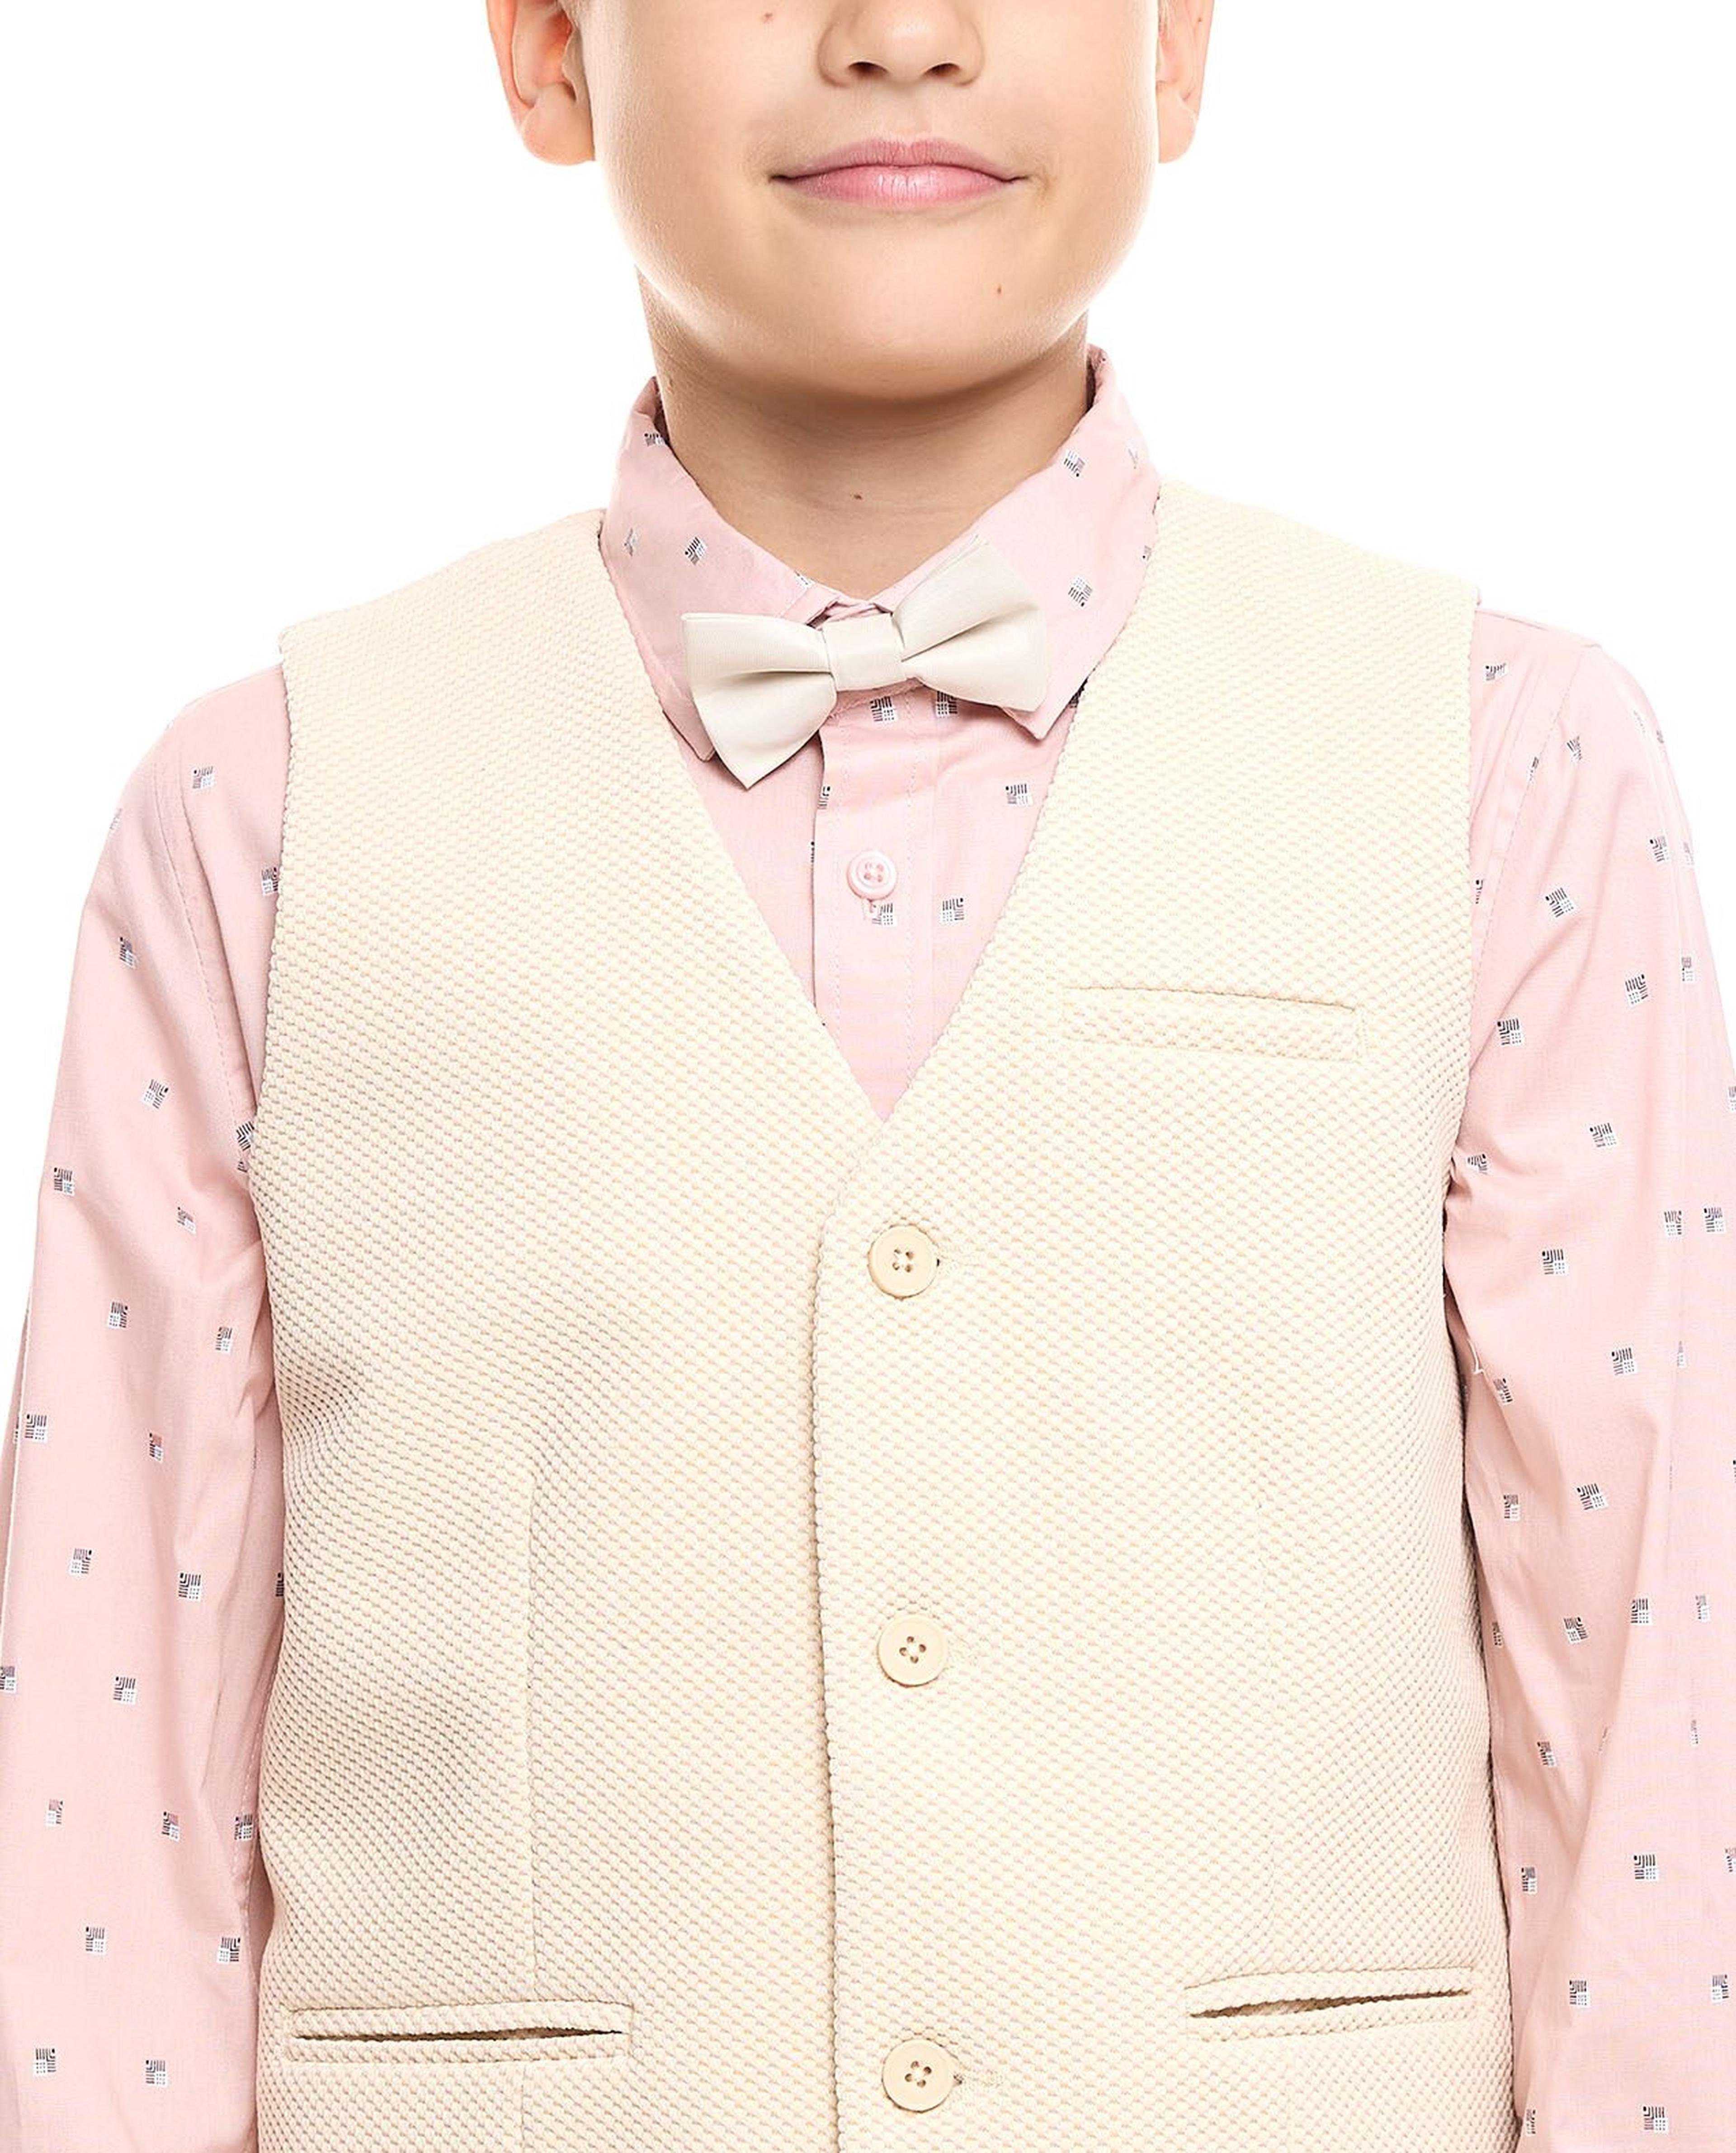 2 Piece Printed Shirt and Wasitcoat with Bow-Tie